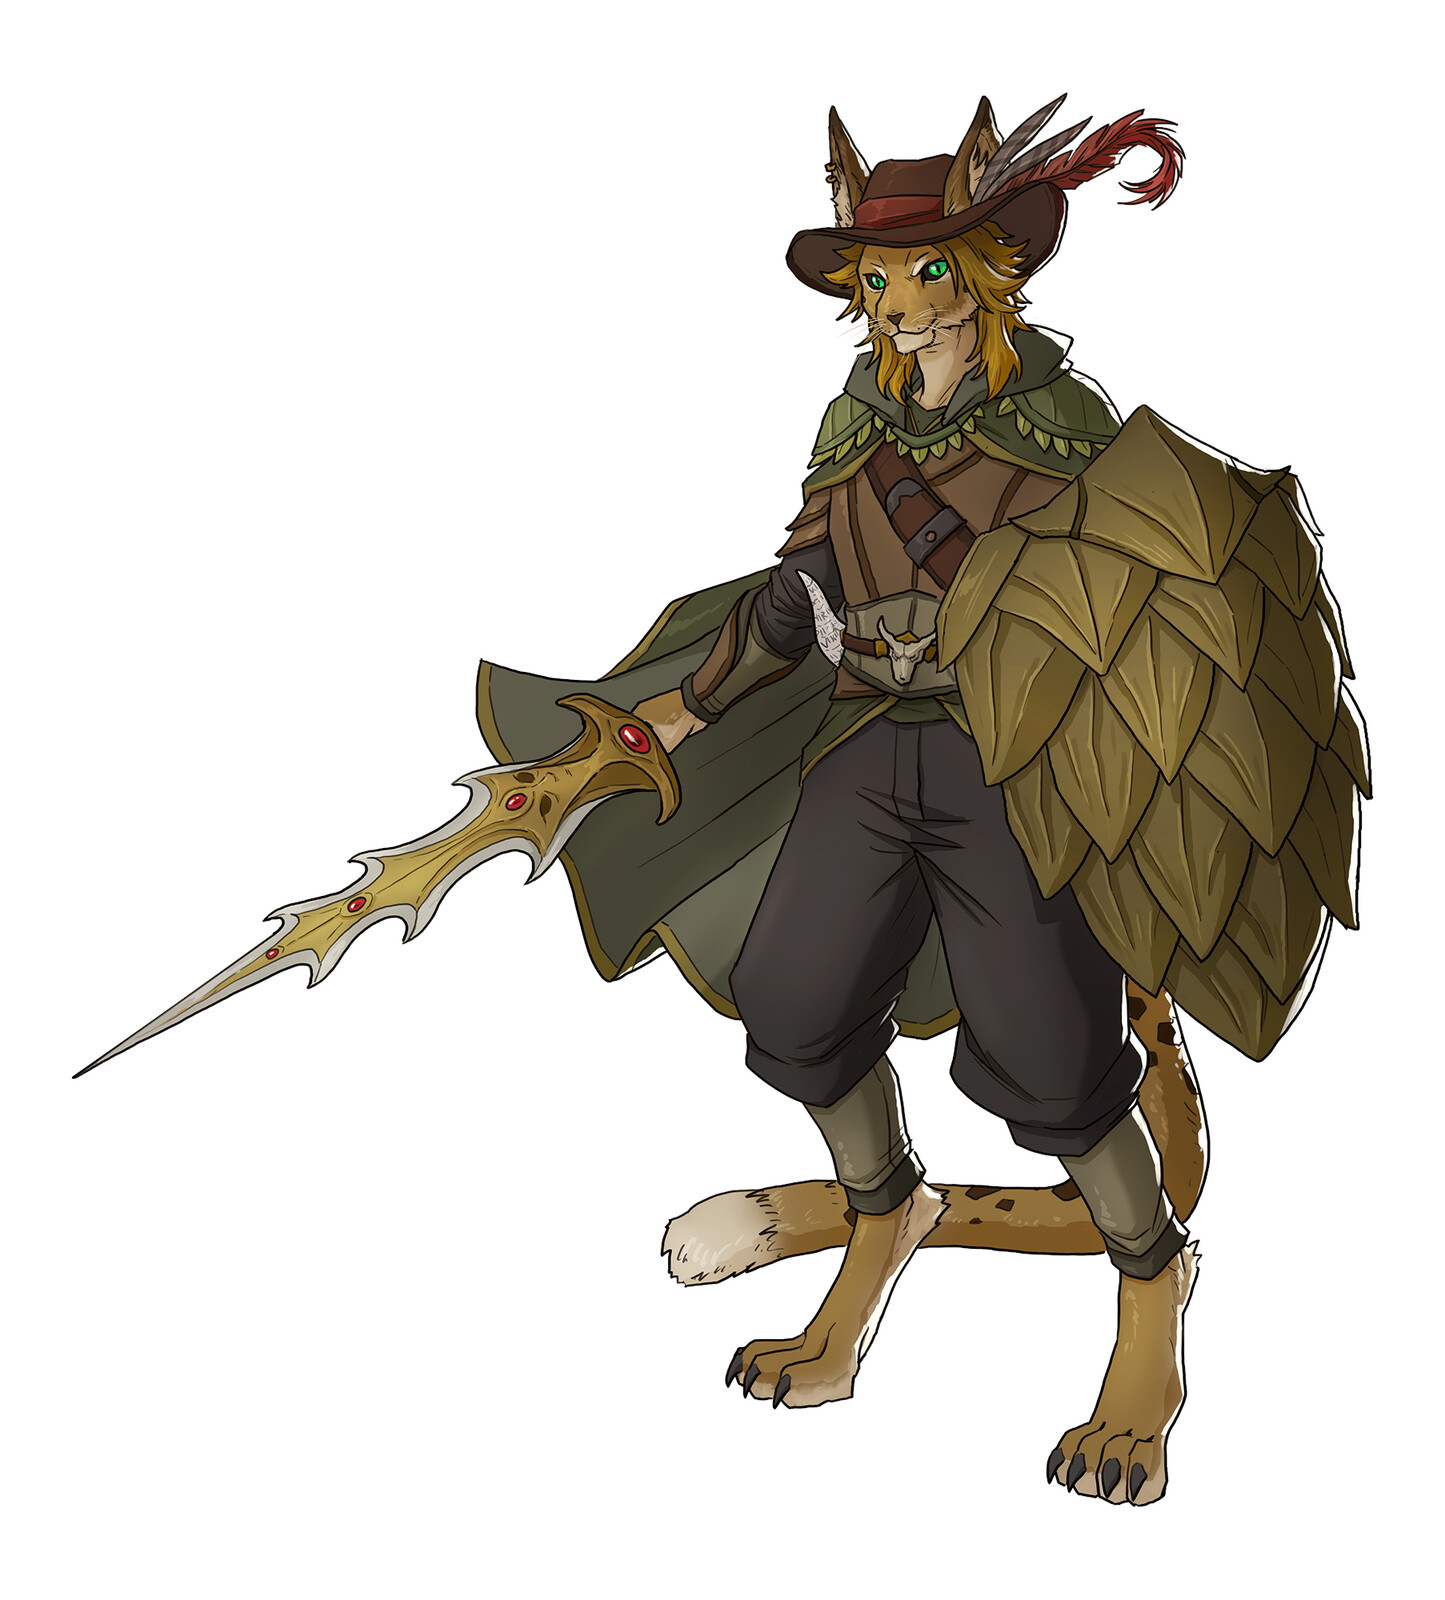 Quill, Tabaxi Fighter